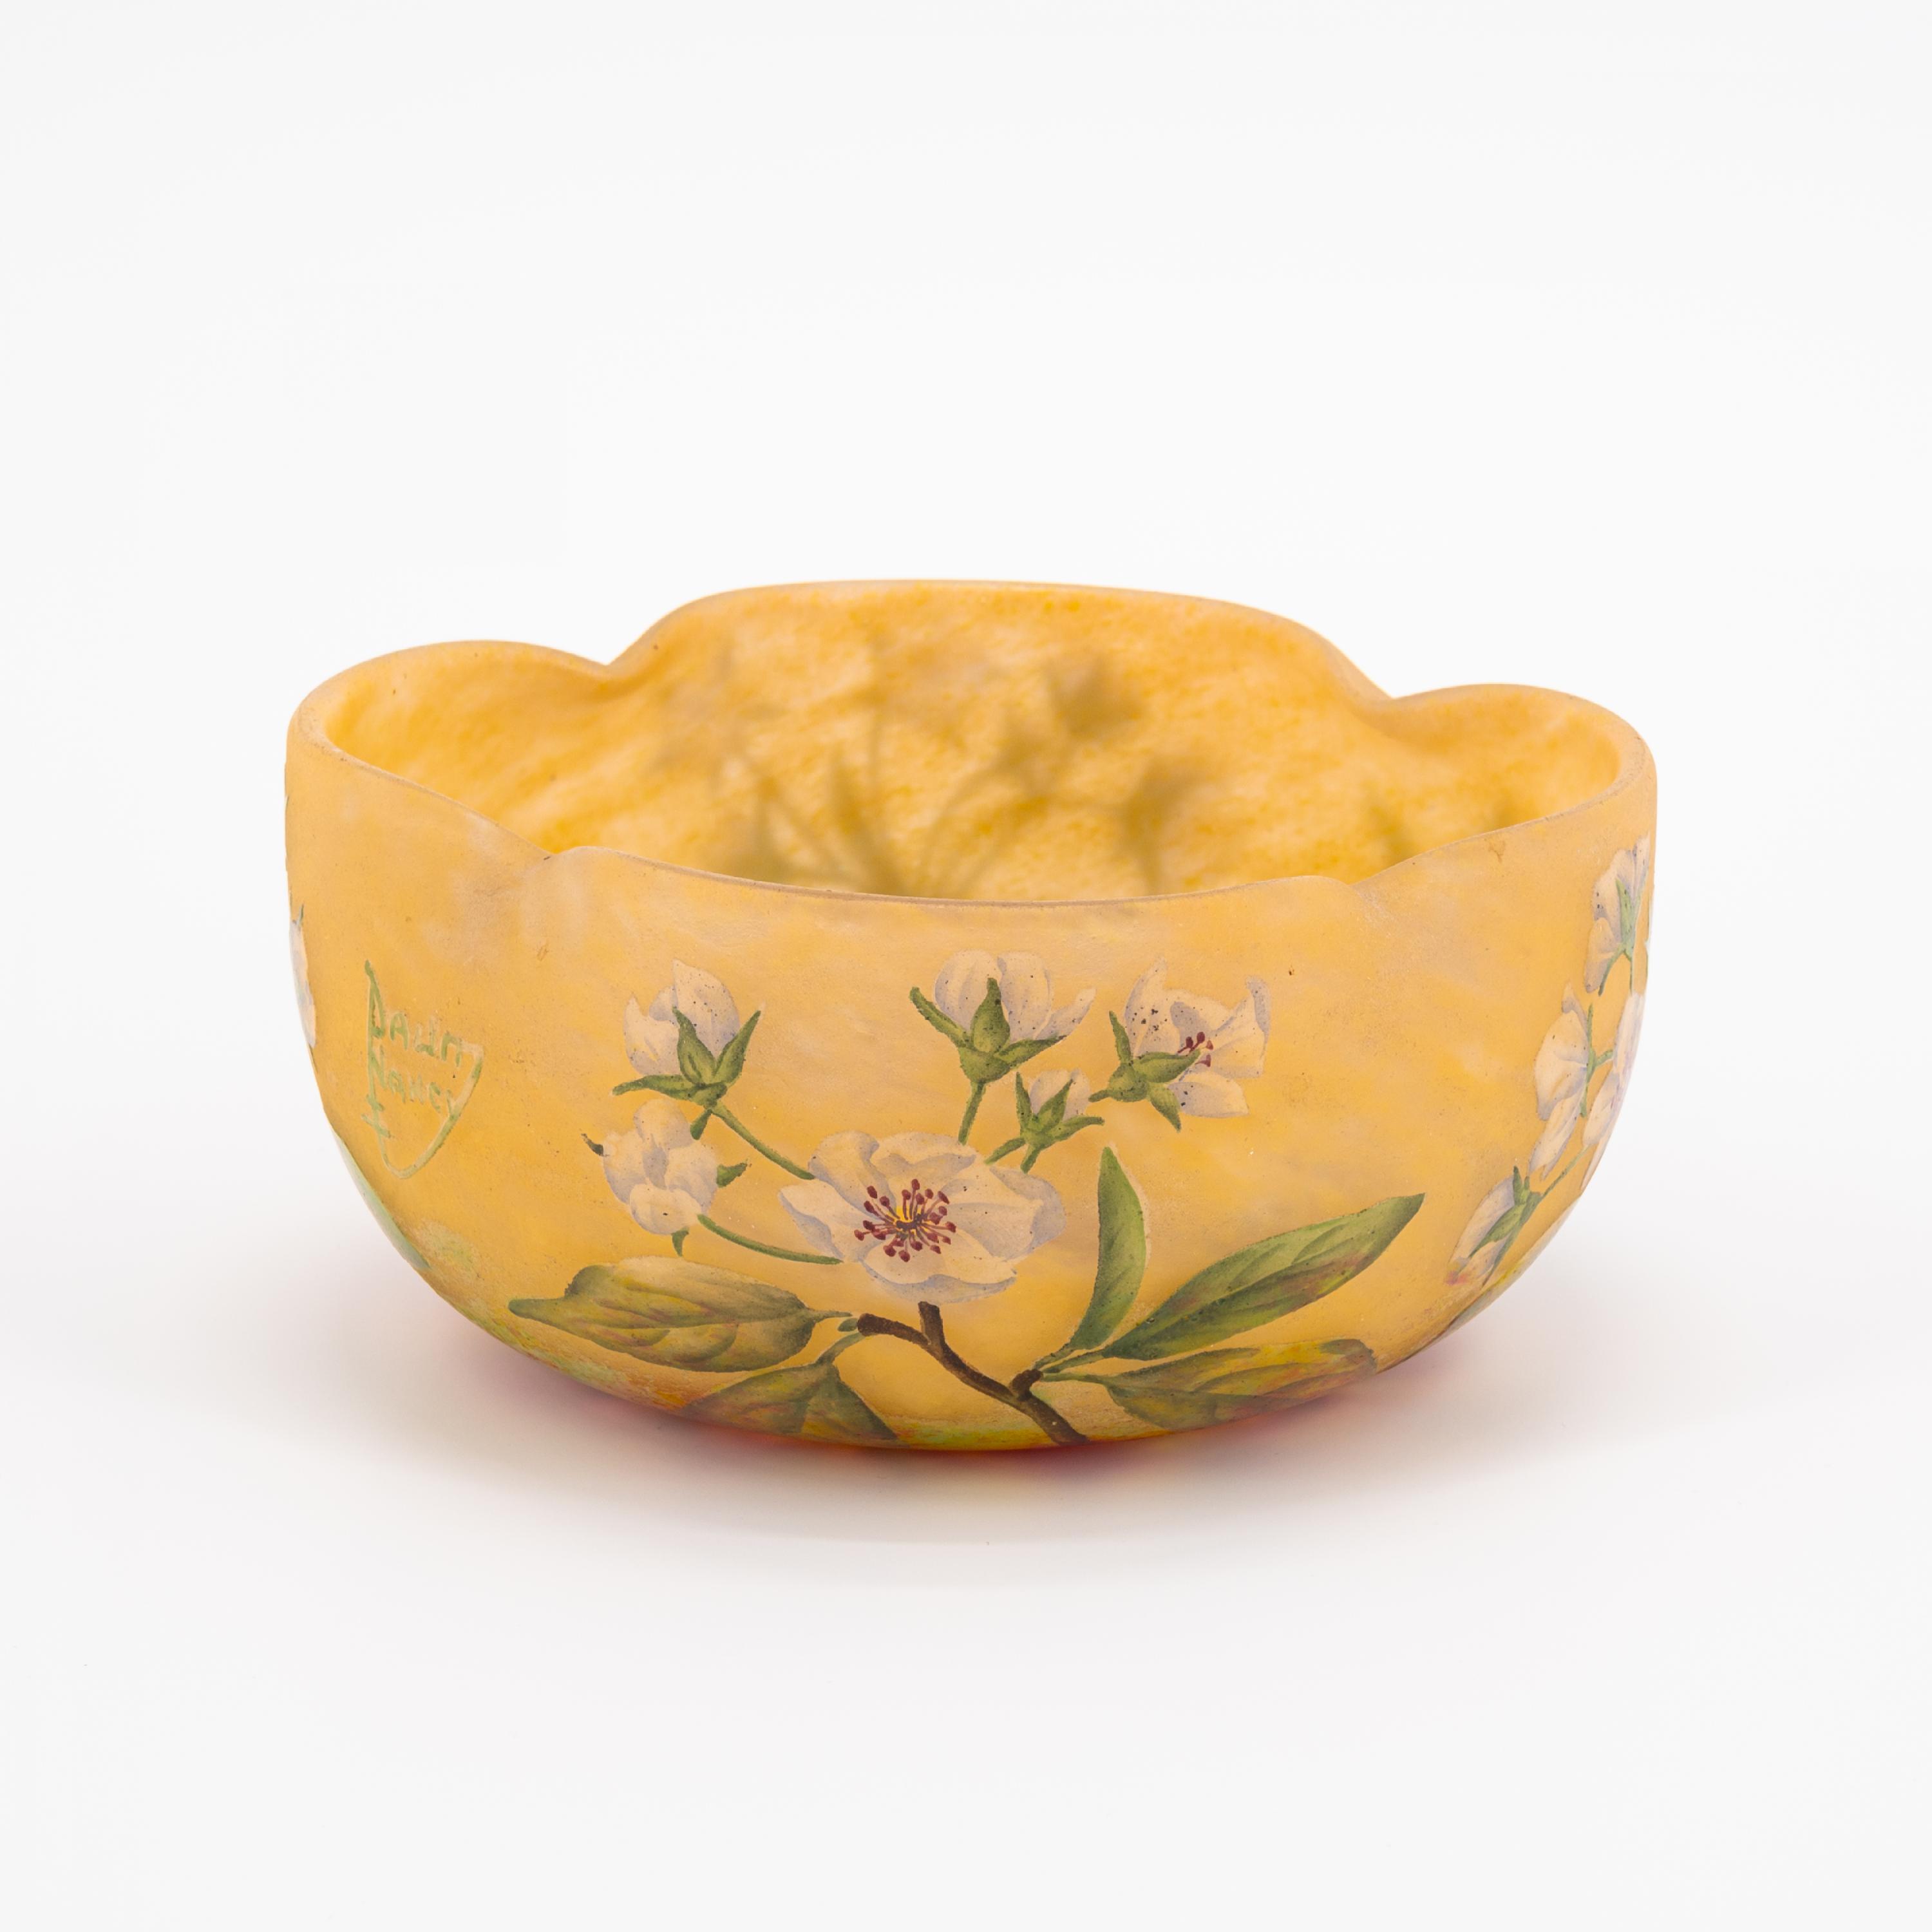 SMALL SCALLOPED GLASS BOWL WITH CHERRY BLOSSOM BRANCHES - Image 4 of 6